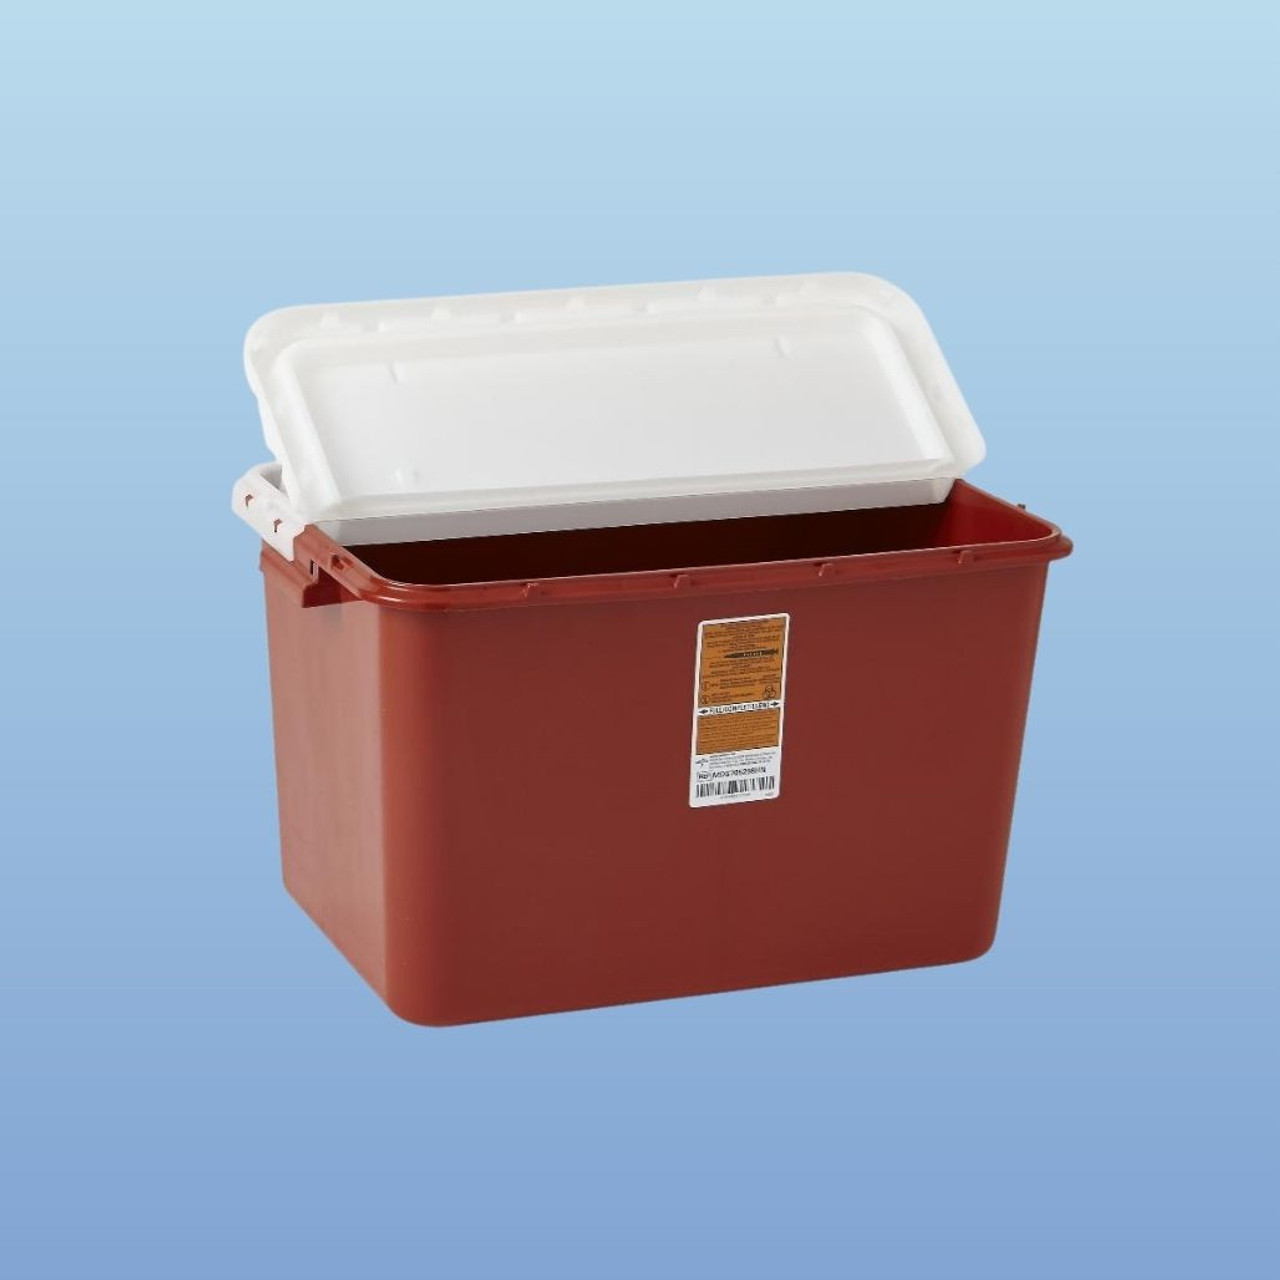 https://cdn11.bigcommerce.com/s-sb8f5ei7ew/images/stencil/1280x1280/products/9325/25381/medline-large-biohazard-containers-red-8-and-18-gal__95005.1697476959.jpg?c=2